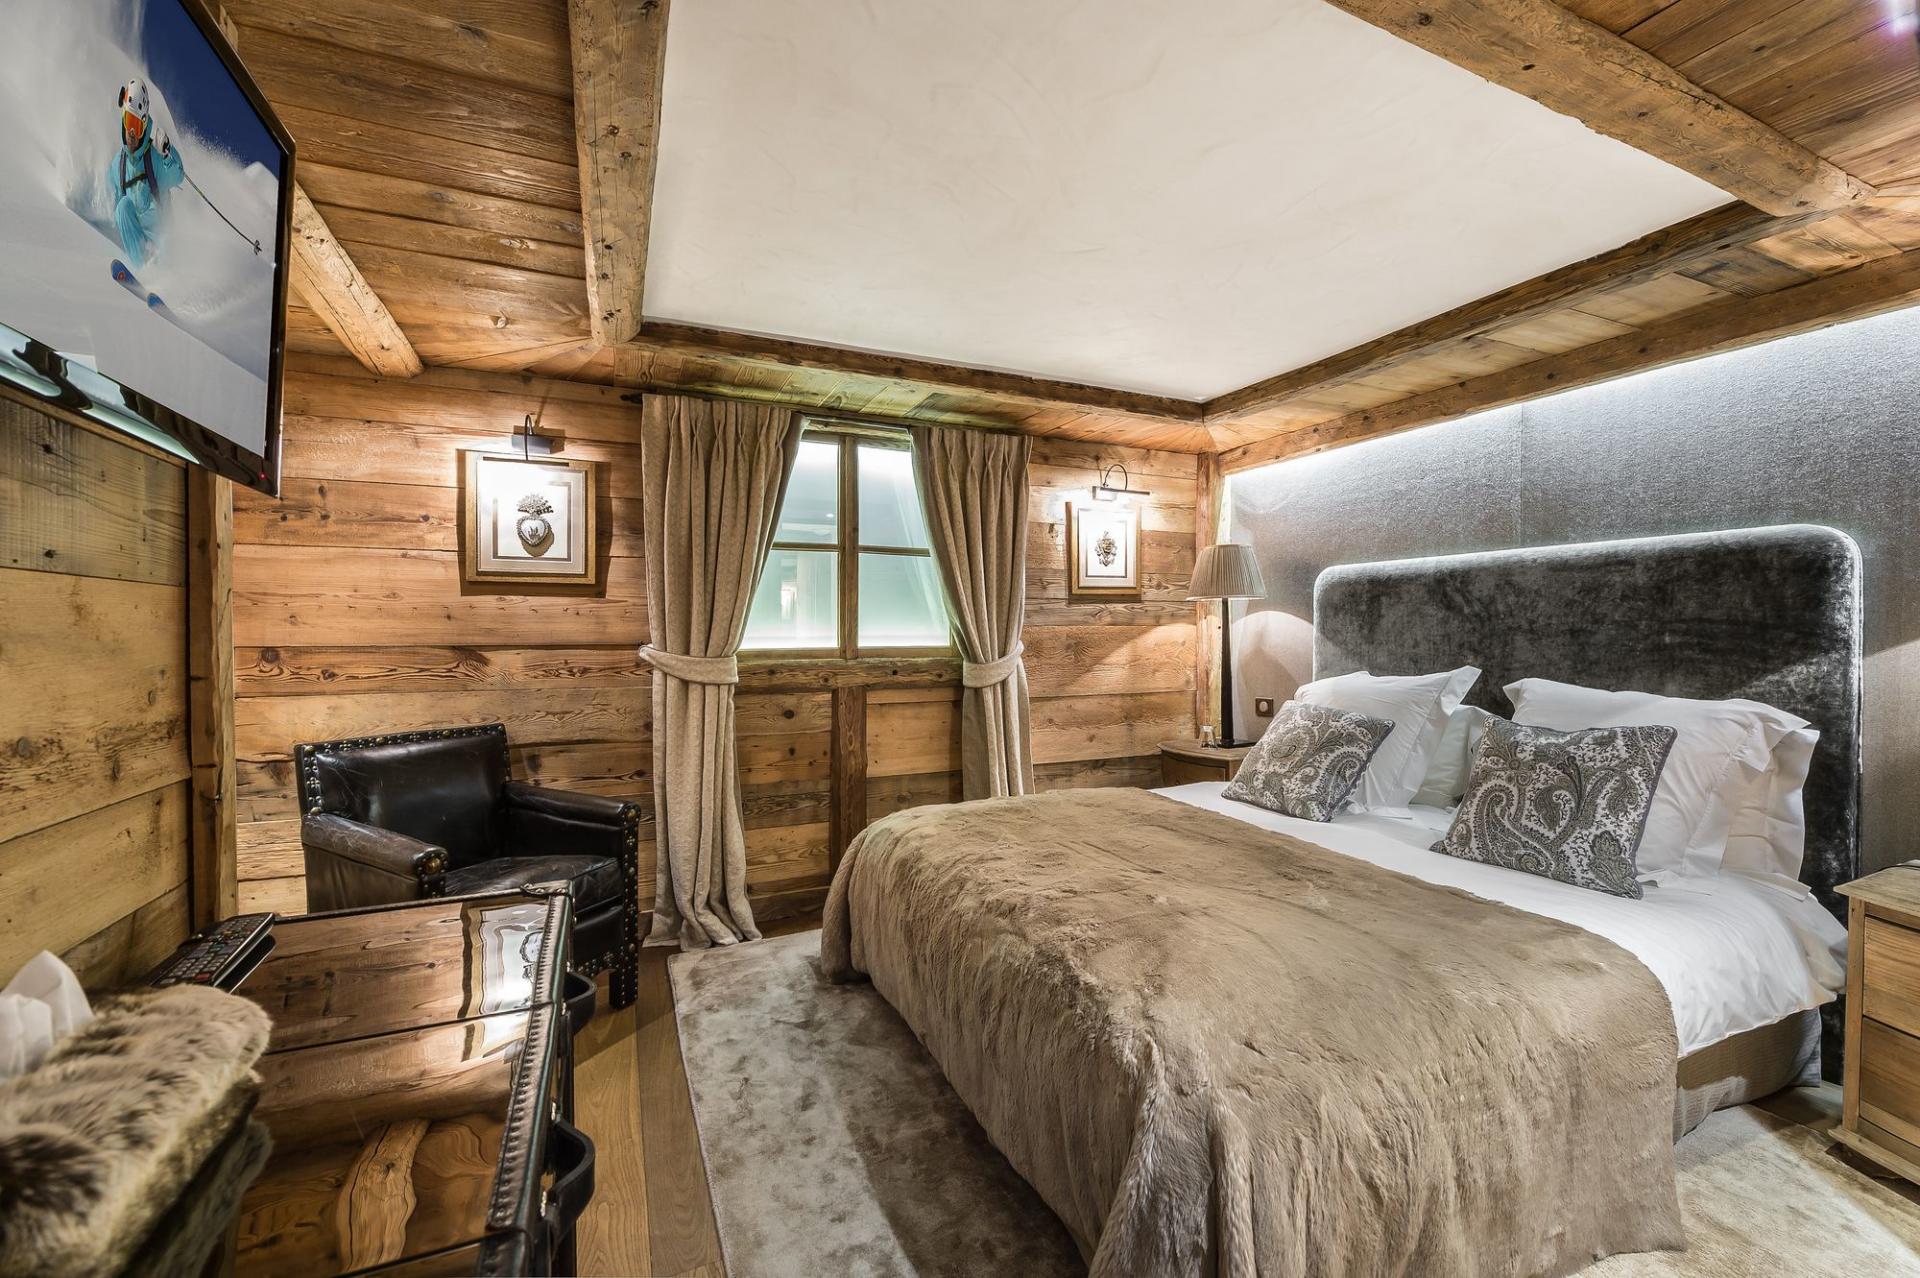 ANOTHER GUEST BEDROOM IN CHALET BELLECOTE